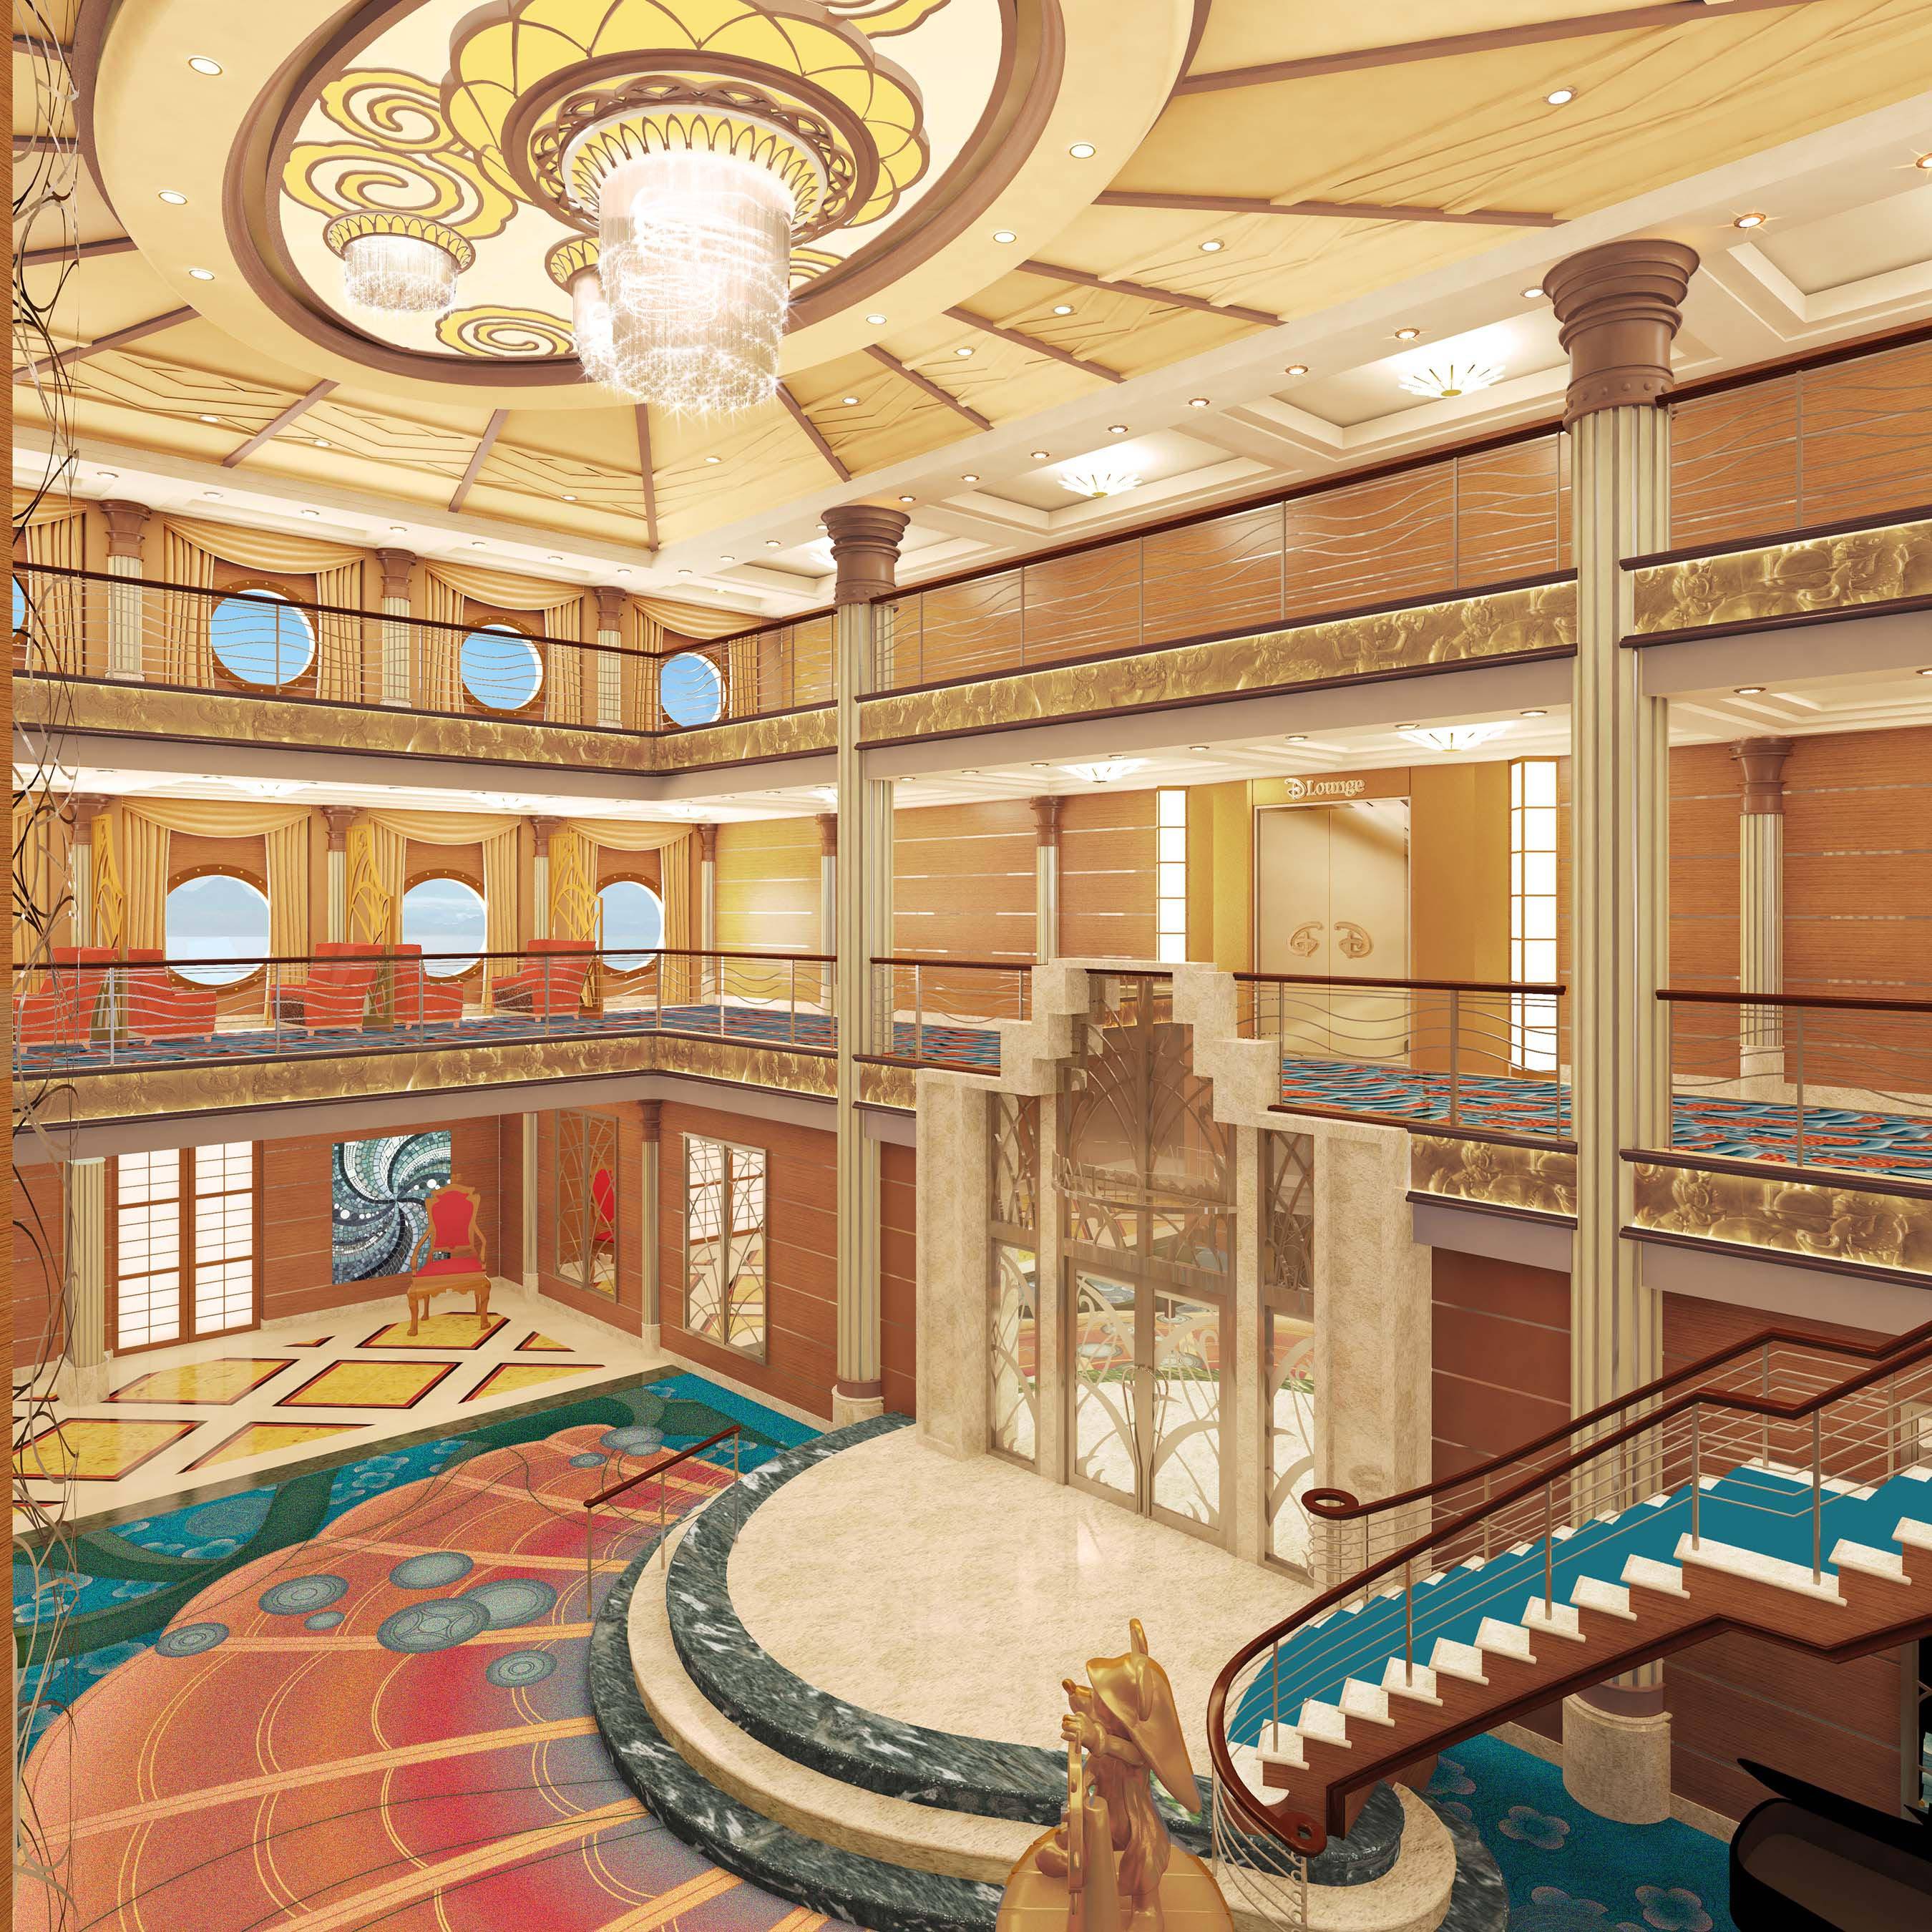 The grand atrium lobby on the Disney Magic, inspired by elegant art deco and elements of the sea, features a palette of vibrant coral, blue and aquamarine, a dazzling new chandelier and a grand staircase. Exuding the elegance of the early 20th century ocean liners, the redesigned Disney Magic atrium will be complete after the ship undergoes dry dock this fall.